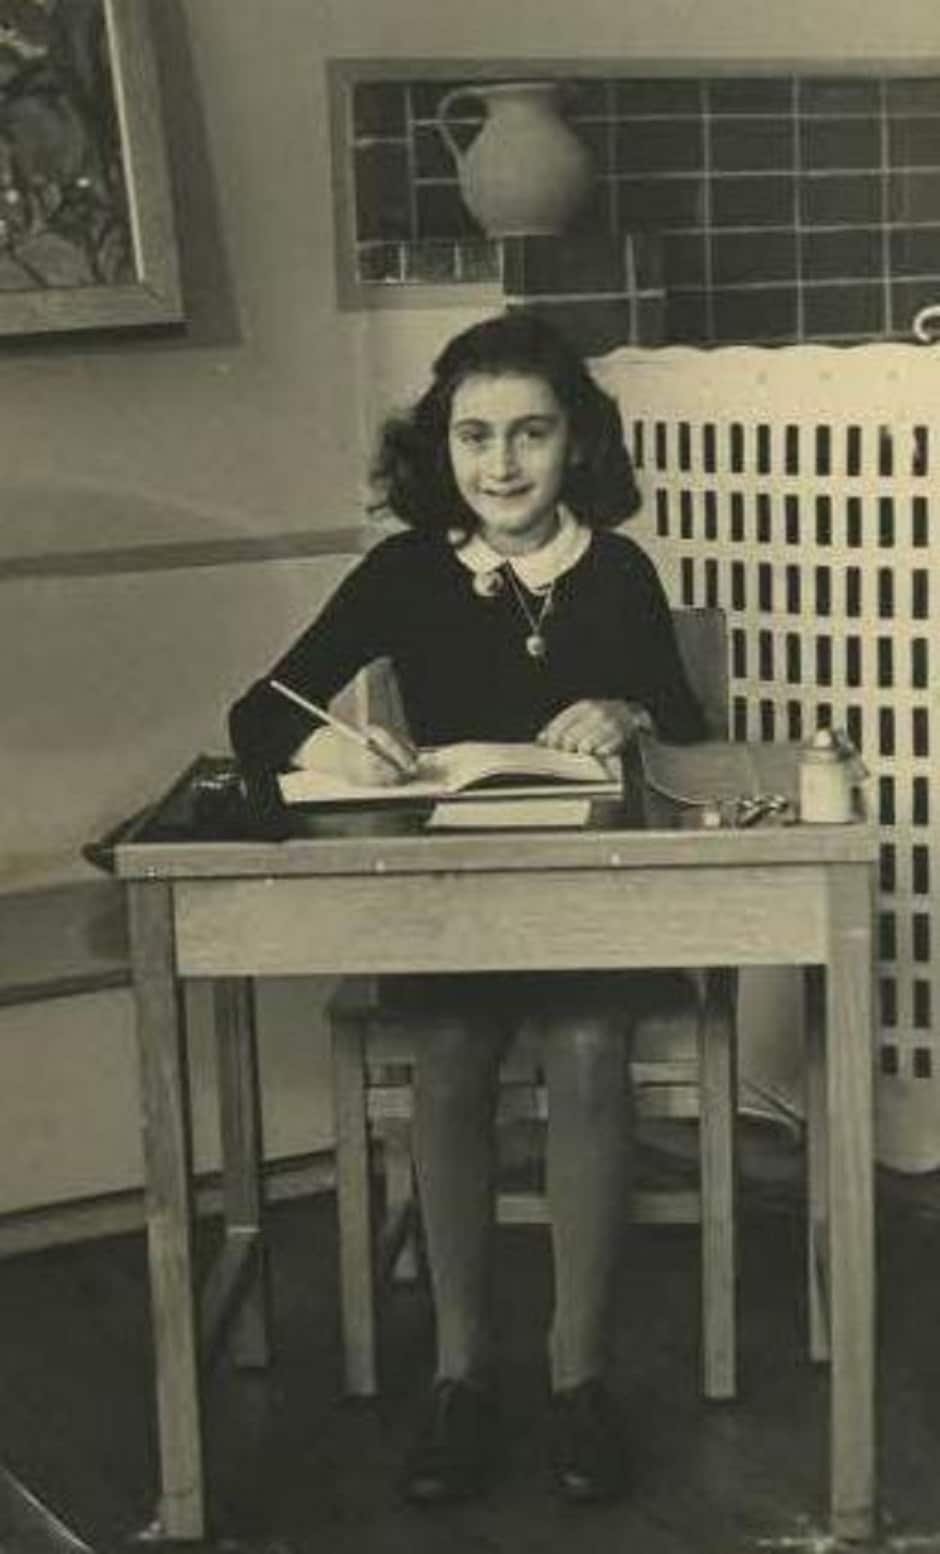 Anne Frank getting her school photo taken before the war, early 1940